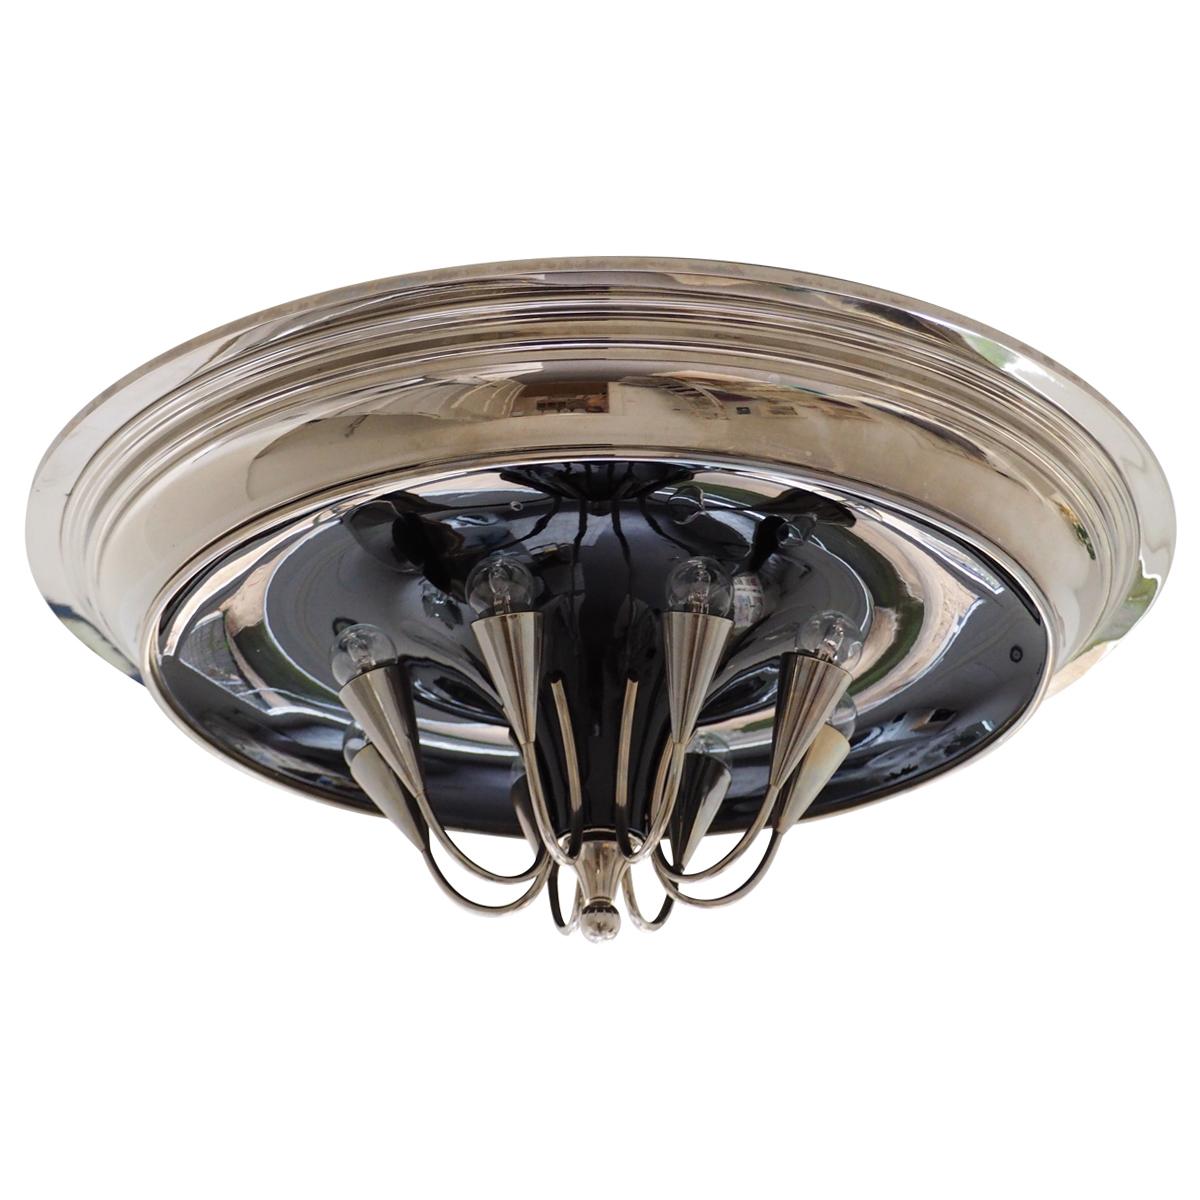 A beautiful huge Art Deco Style flush mount, Austria, circa 1970- 1990s.
This spectacular  light fixture is made of nickeled and black lacquered brass.
Diameter : 31.49 inches.
Socket: 8 x E27 or E26 for standard  screw bulbs.

